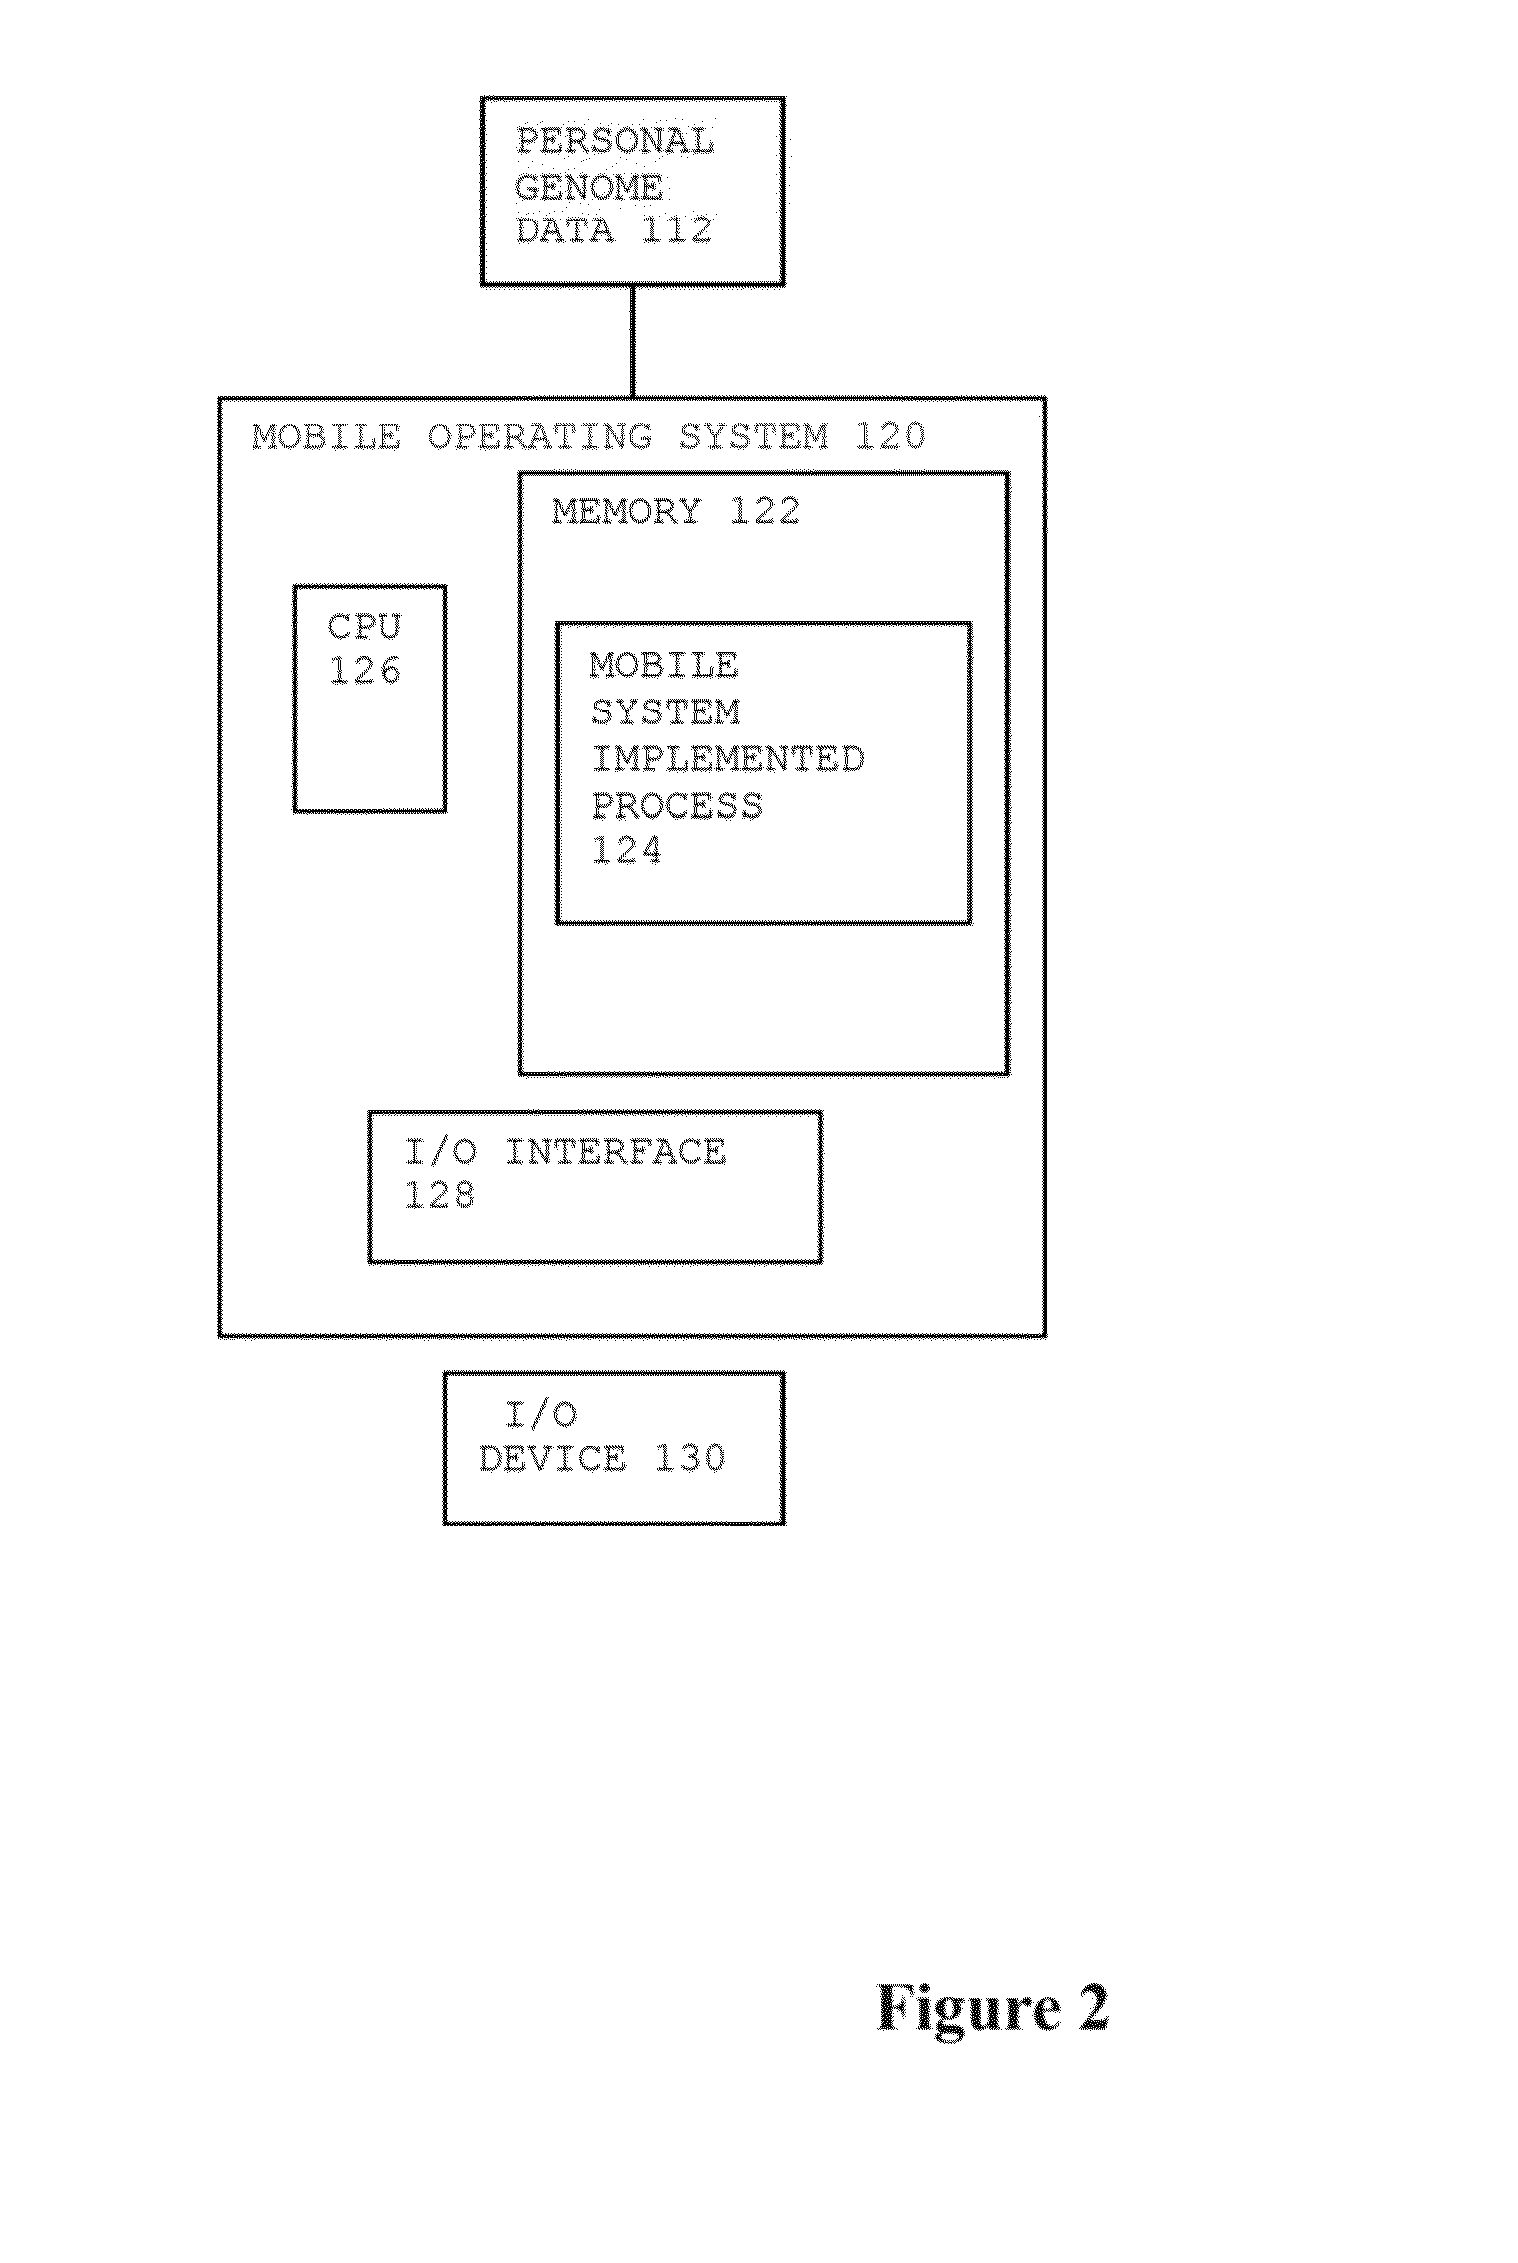 Method for Personal Genome Data Management